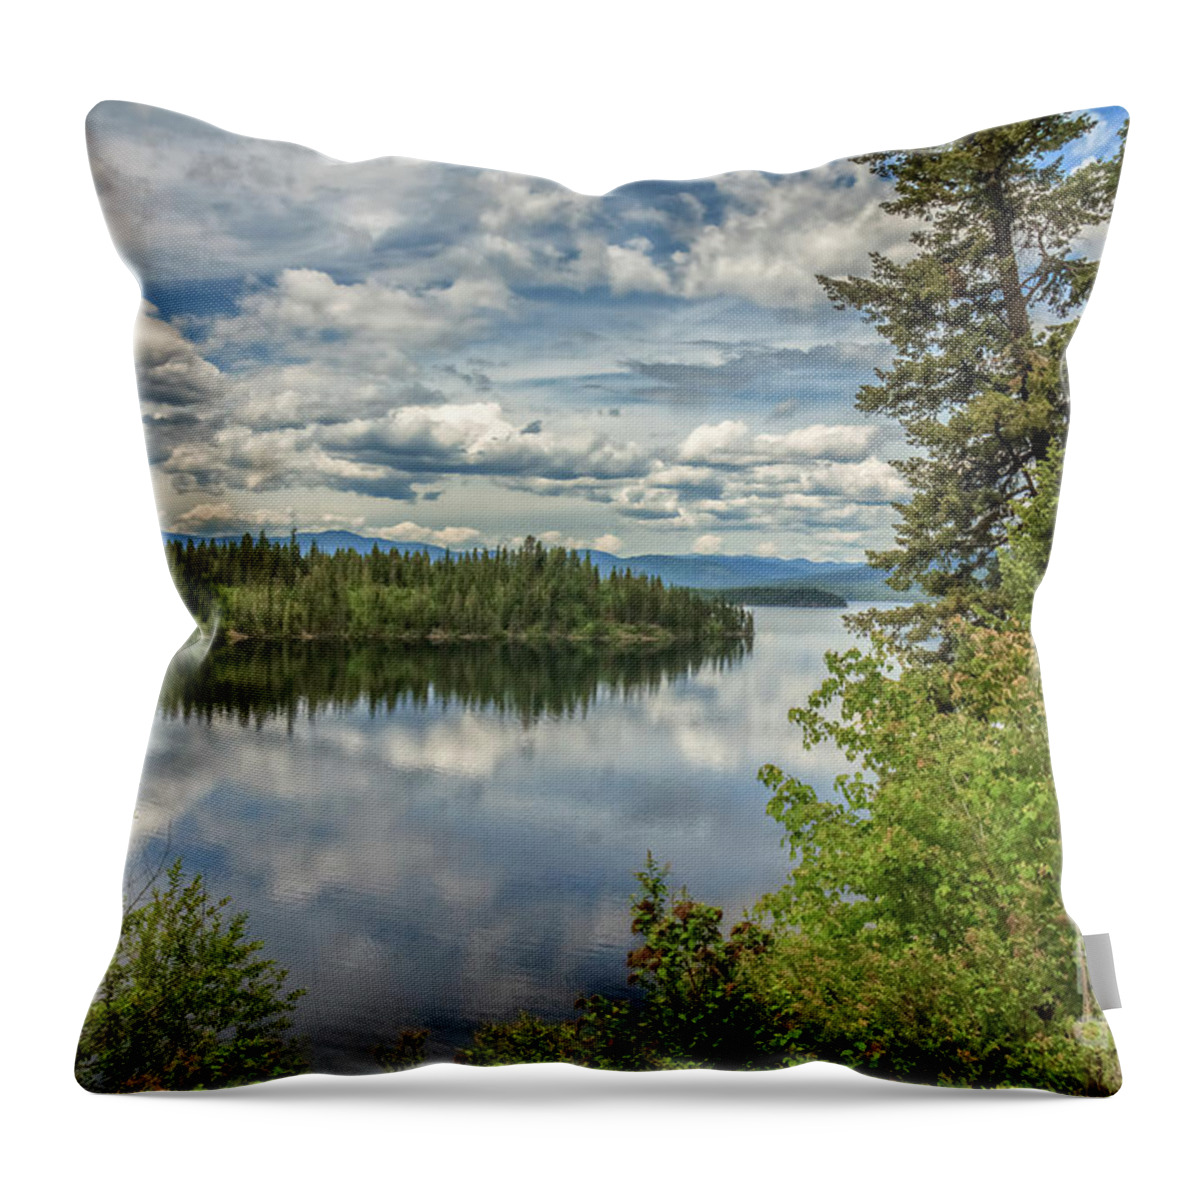 Priest Lake Throw Pillow featuring the photograph Clouds Over Priest Lake by Robert Bales